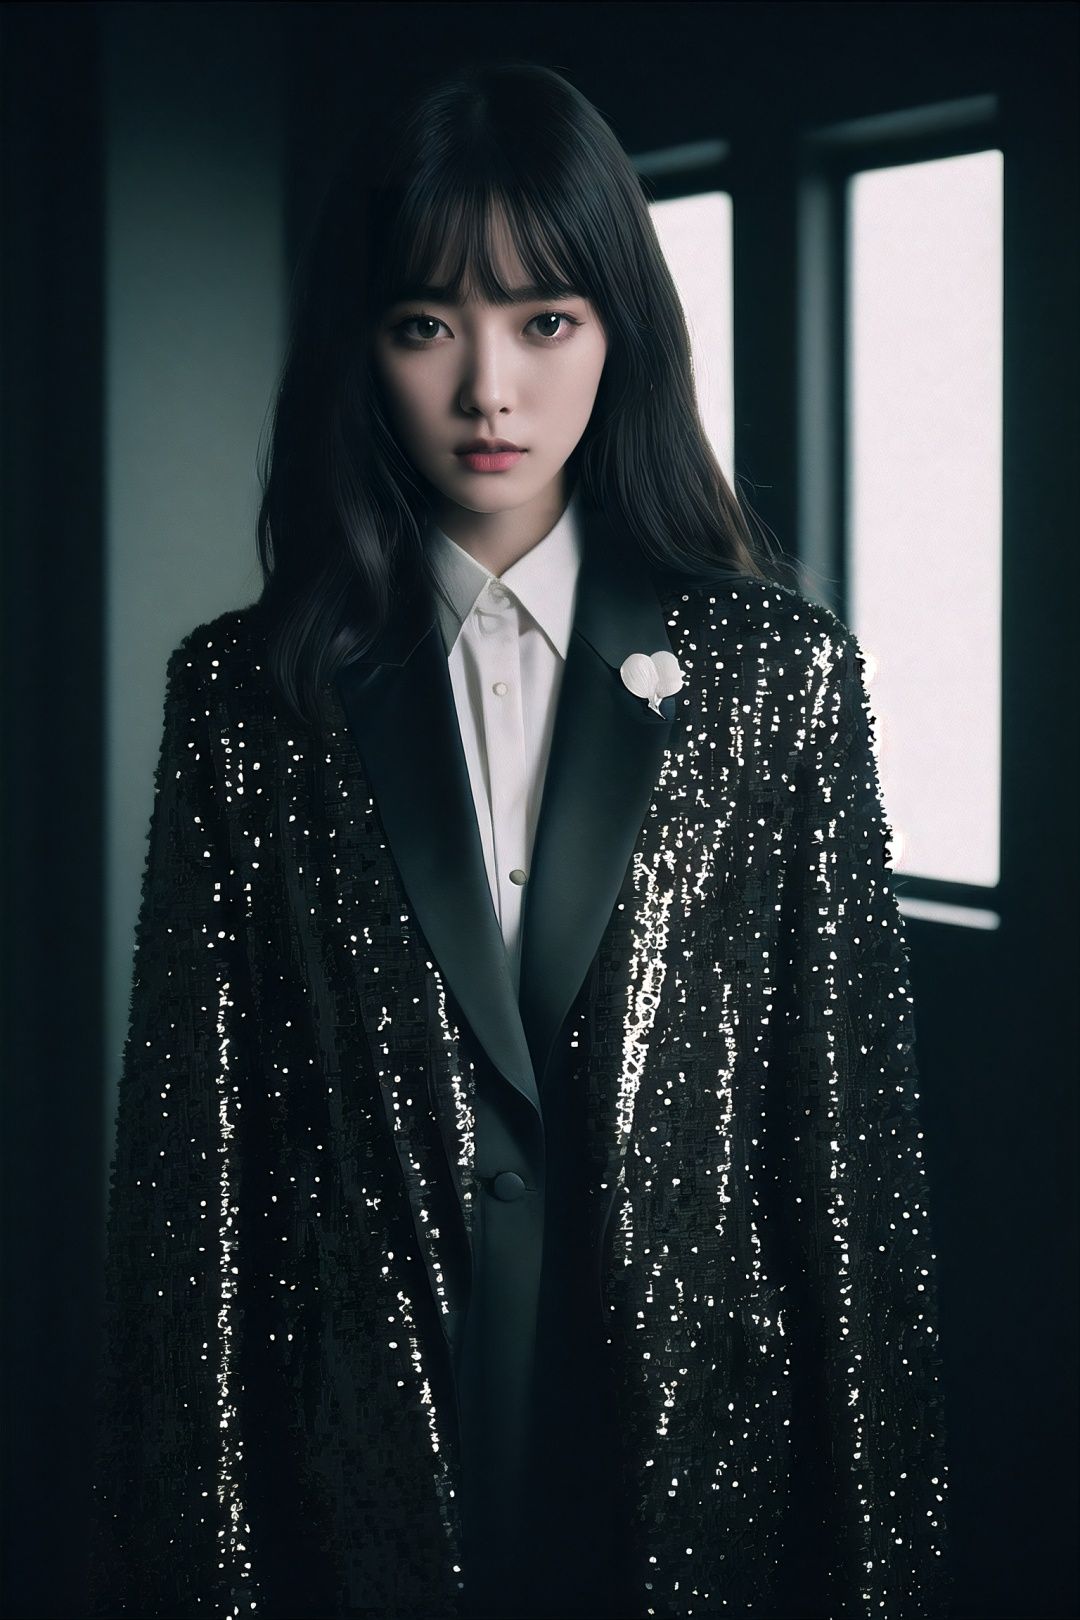  breathtaking lovecraftian horror , eldritch, cosmic horror, unknown, mysterious, surreal, highly detailed, Fujifilm FP-100C, Tom Ford sequin-embellished tuxedo jacket with satin lapels, positive space composition, RickOwens(瑞克·欧文斯), girl, 1girl, solo . award-winning, professional, highly detailed